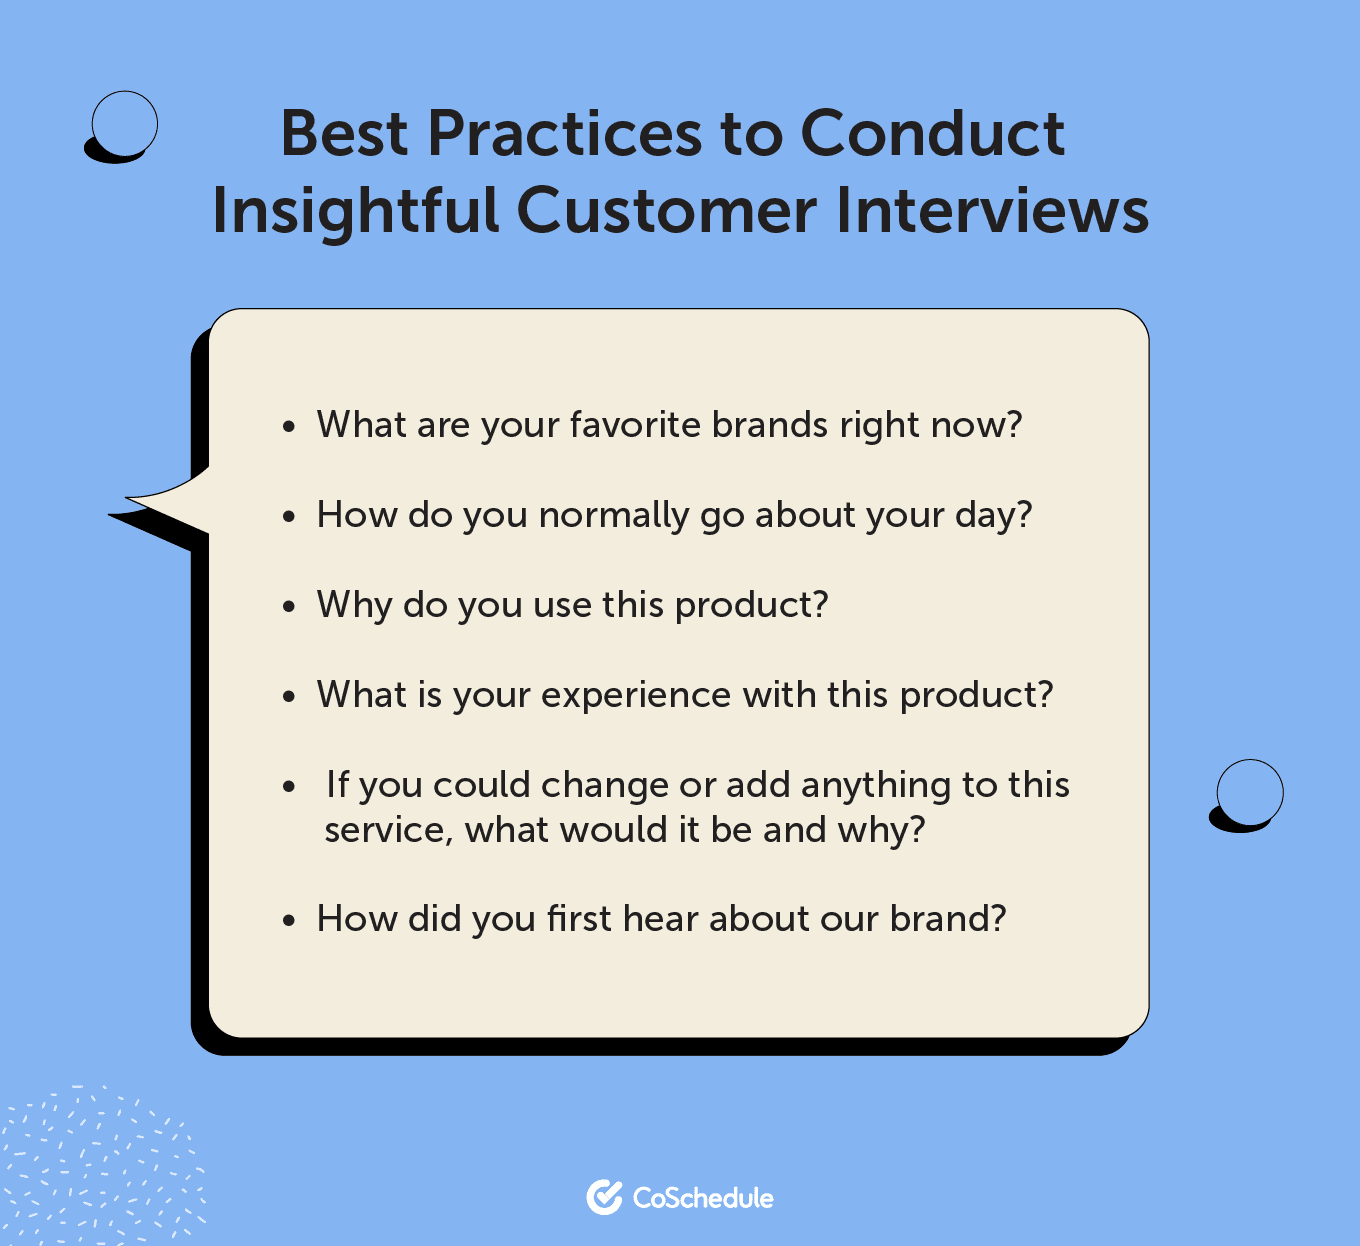 Best practices to conduct insightful customer interviews